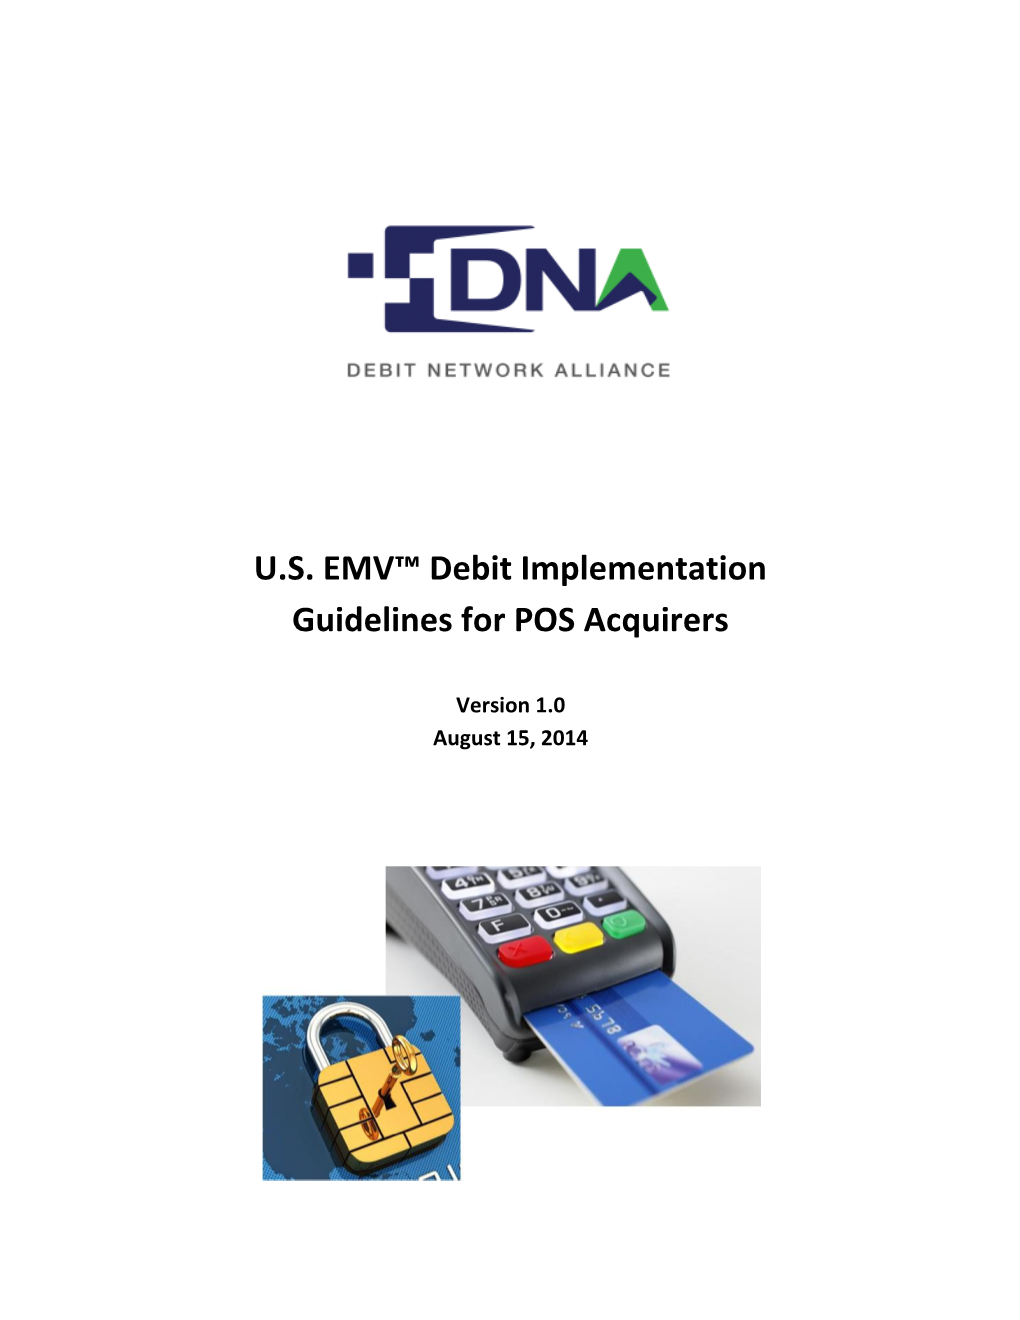 US EMV™ Debit Implementation Guidelines for POS Acquirers